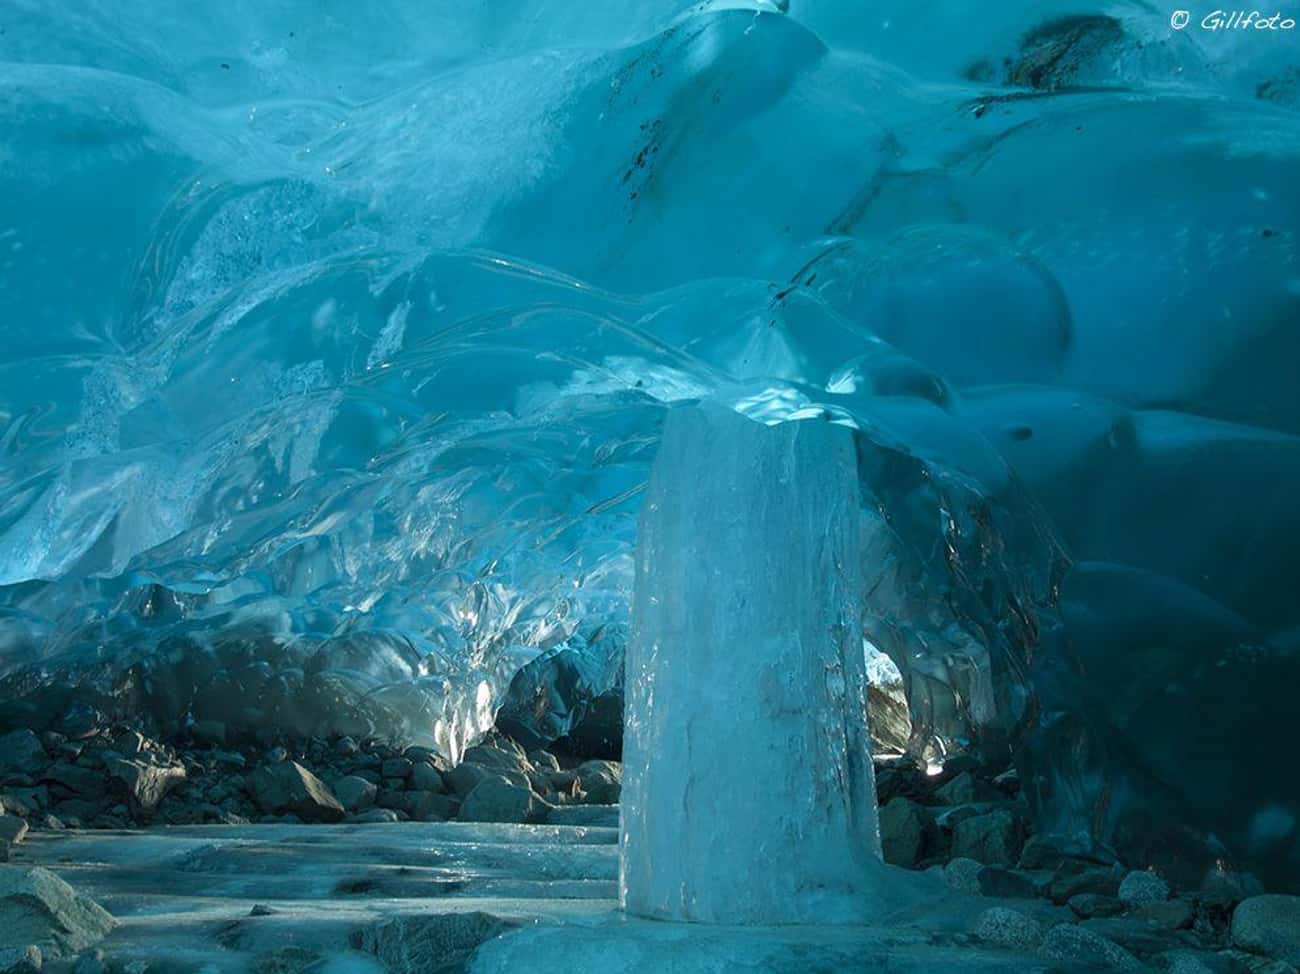 An Ethereal Ice Cave In Mendenhall Glacier, Alaska